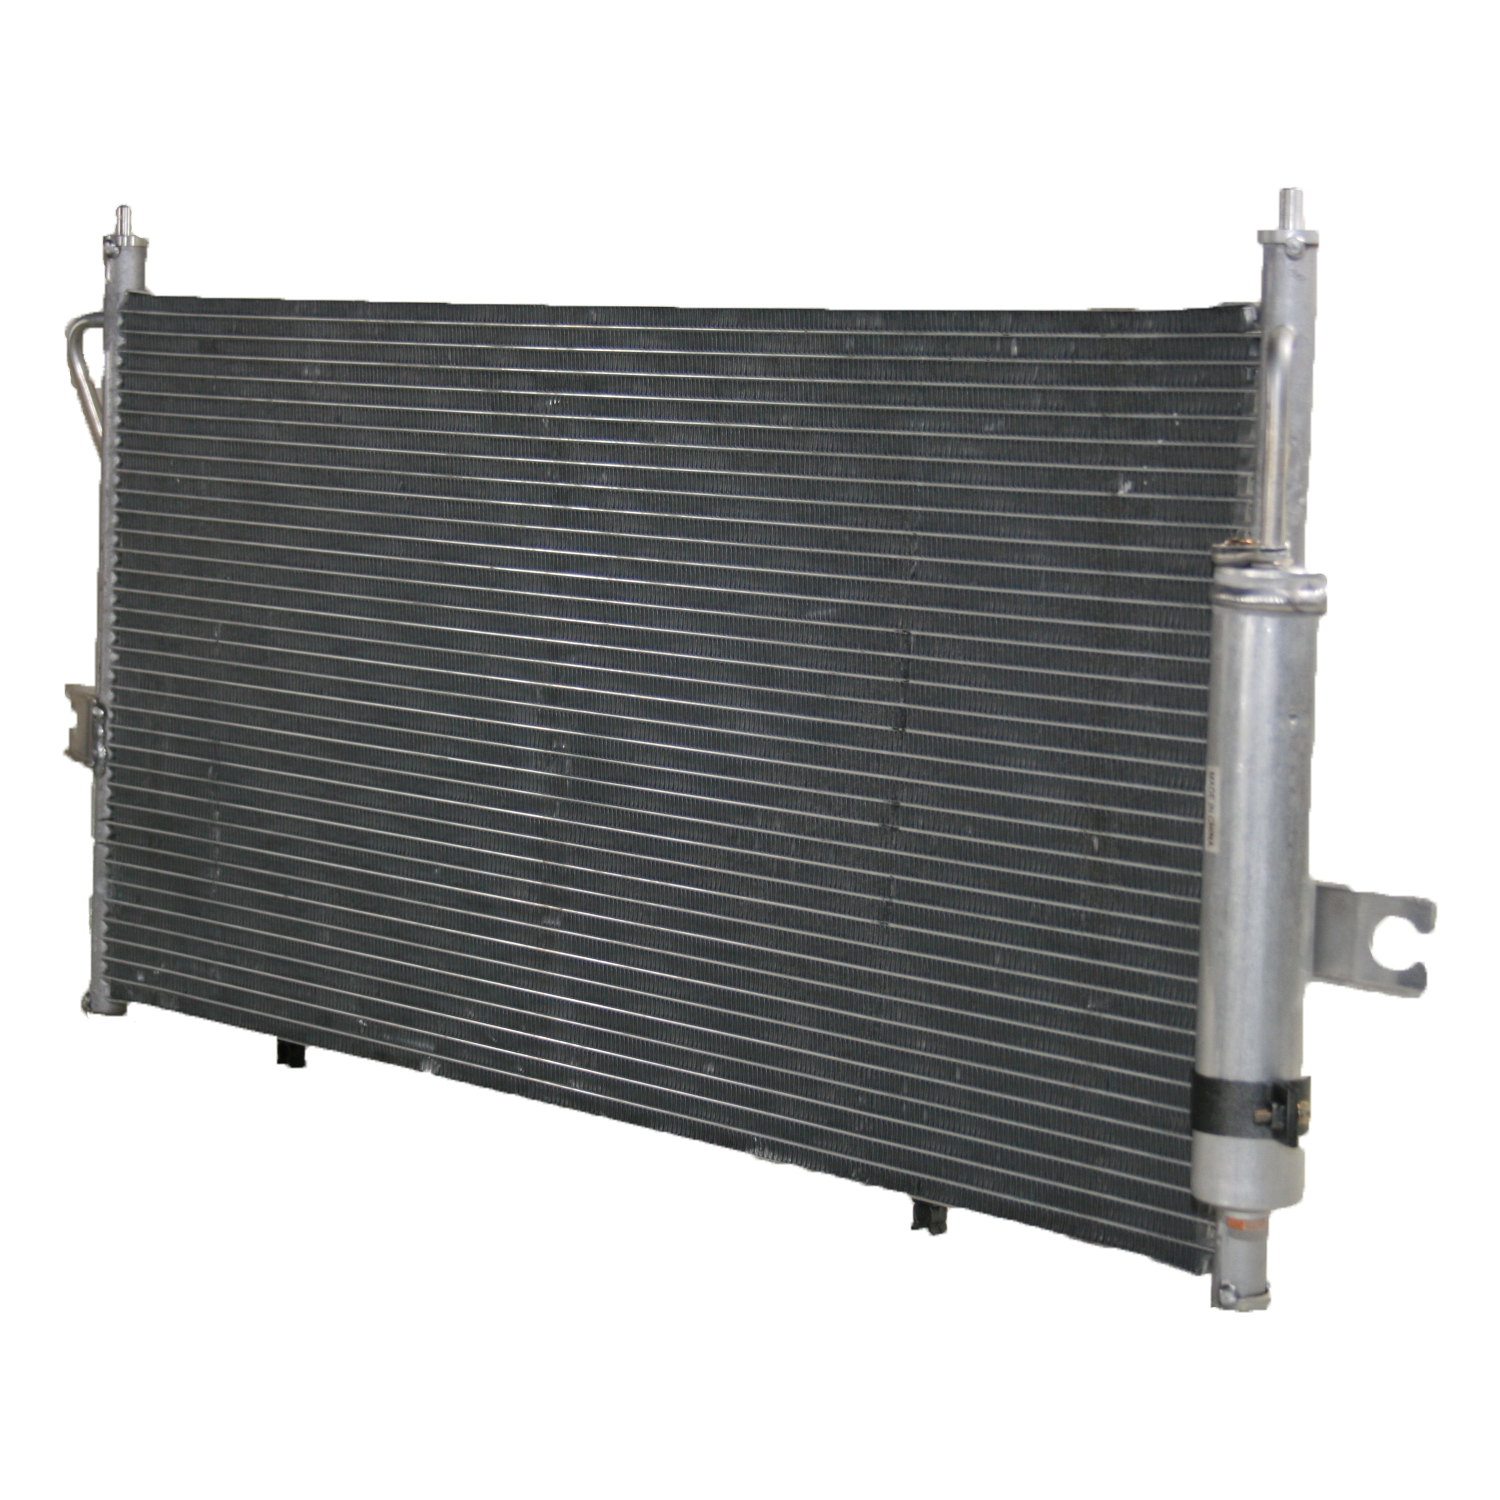 TCW Condenser 44-3100 New Product Image field_60b6a13a6e67c